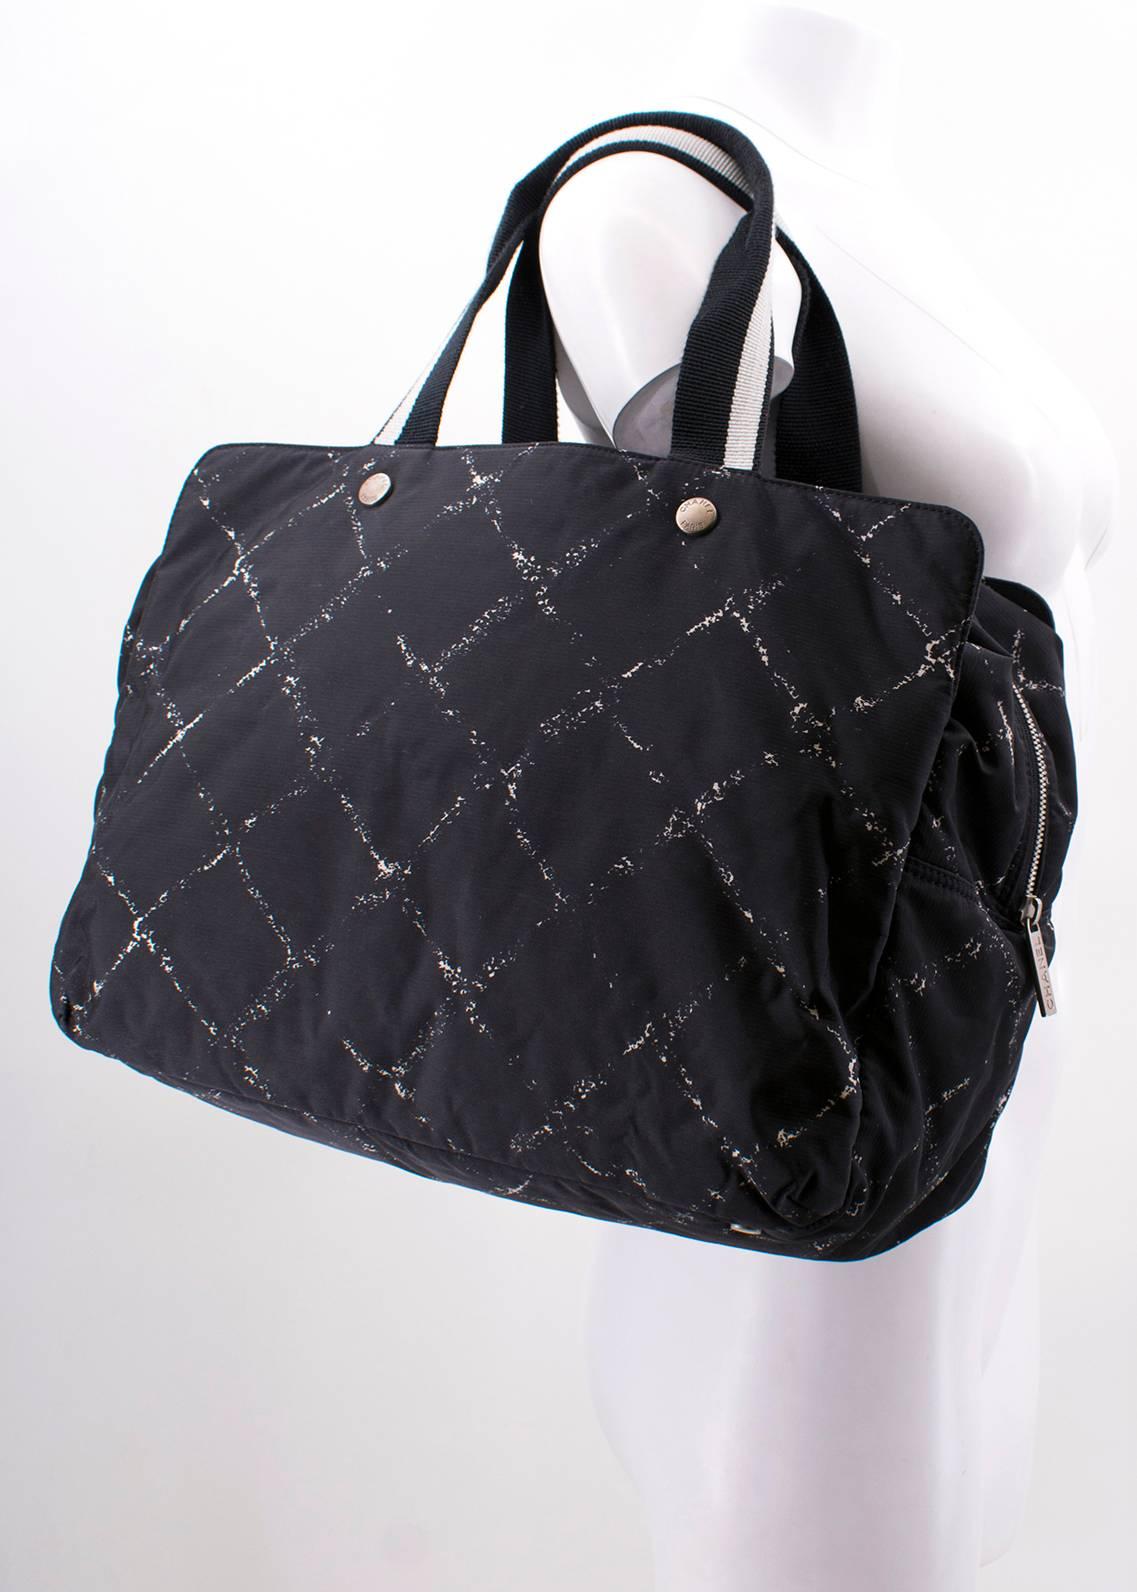 Chanel Black Criss Cross Large Tote Duffle Bag For Sale 1